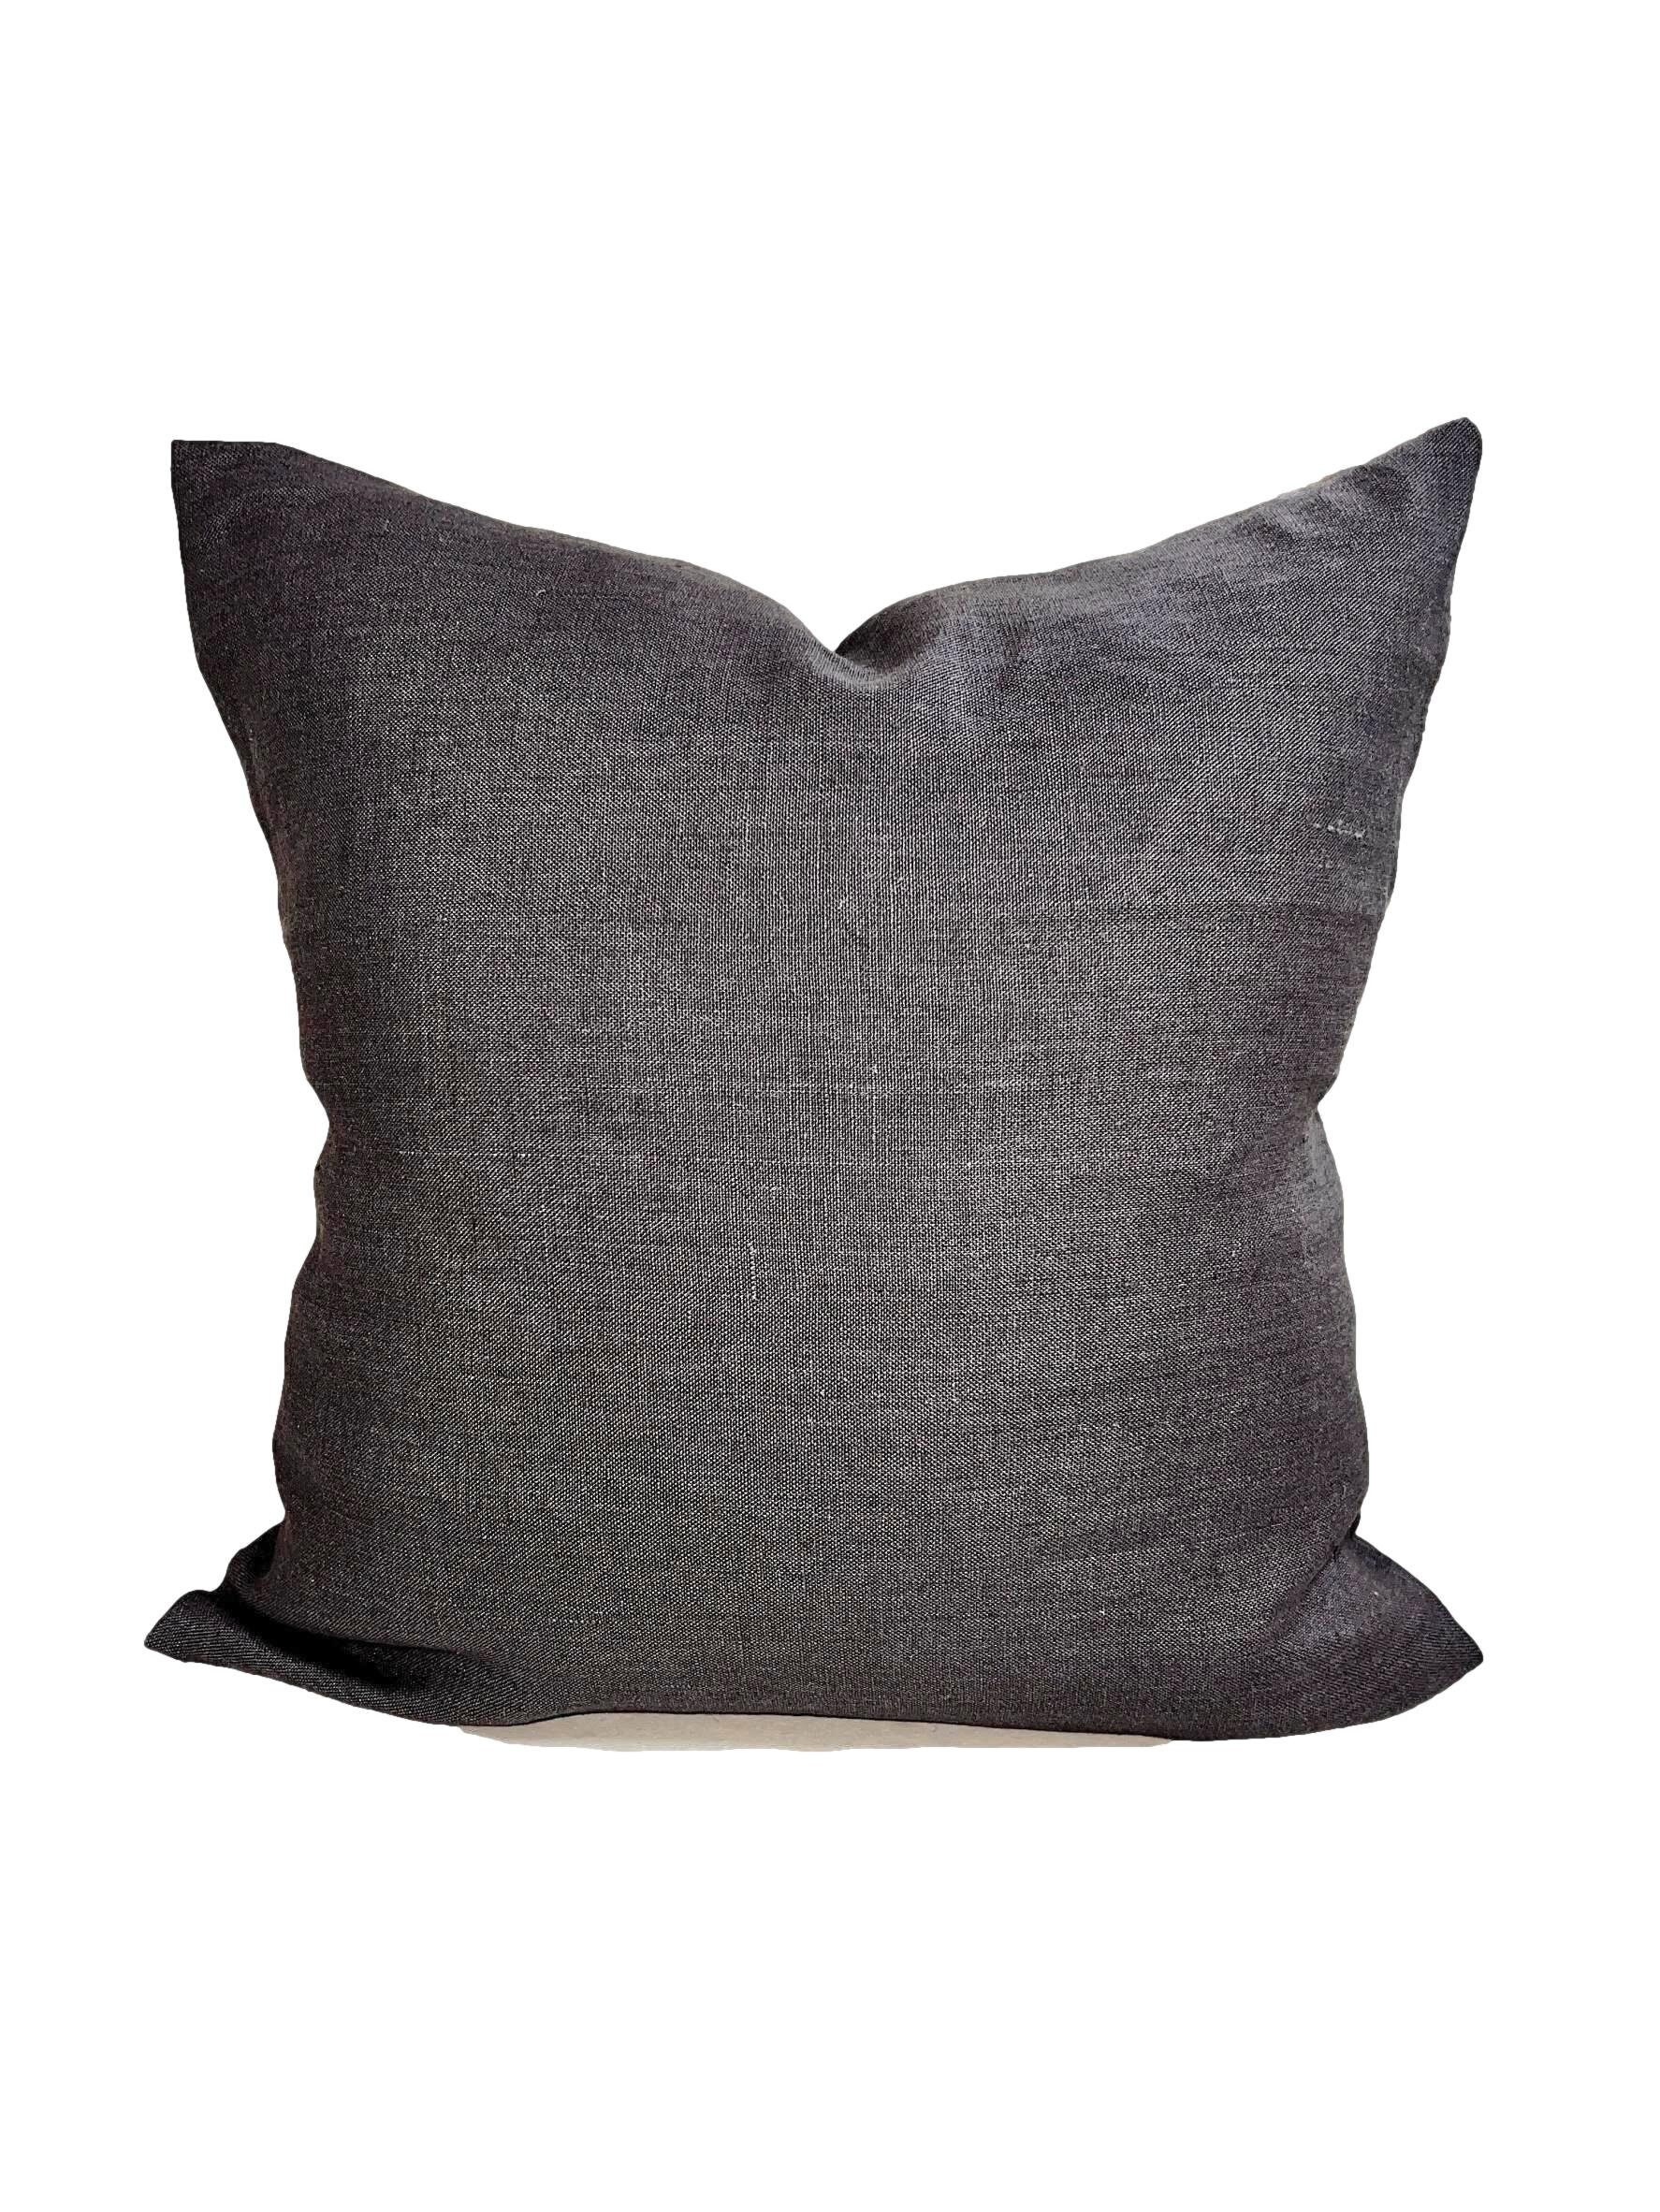 Solid Charcoal Pillow Cover Solid Gray Throw Pillow COVERS - Etsy Canada